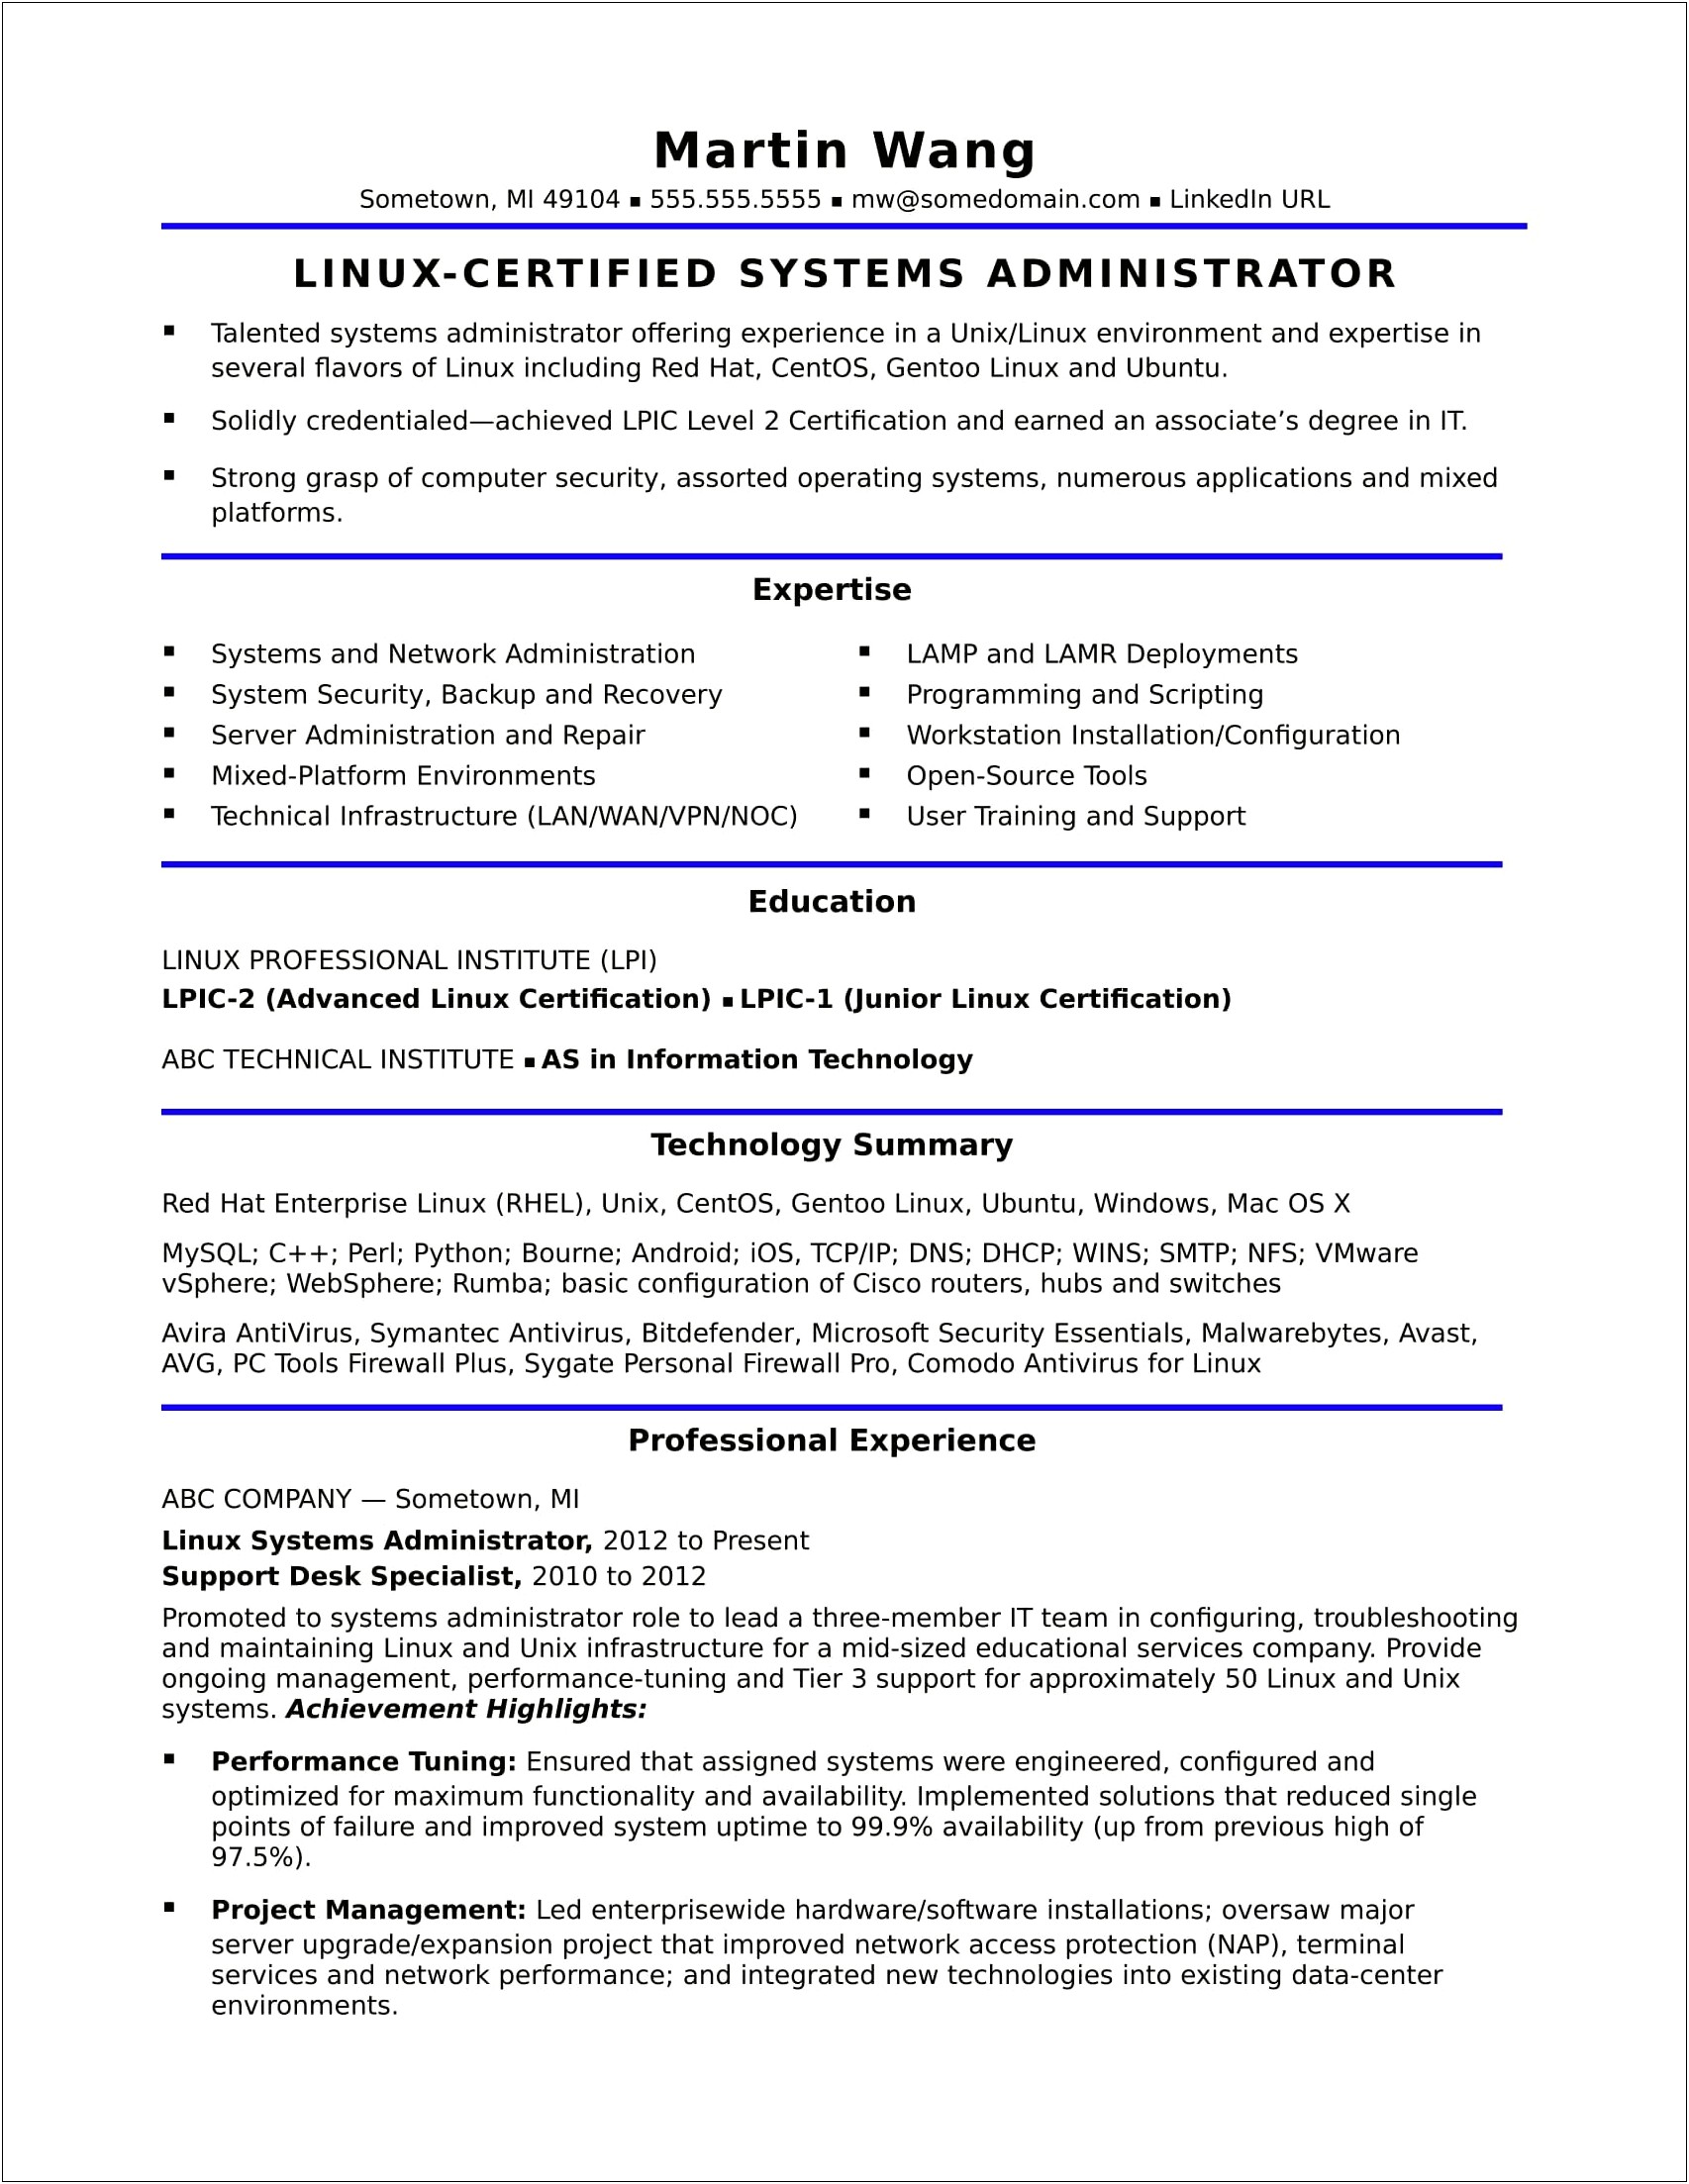 Resume Summary Samples For System Administrator